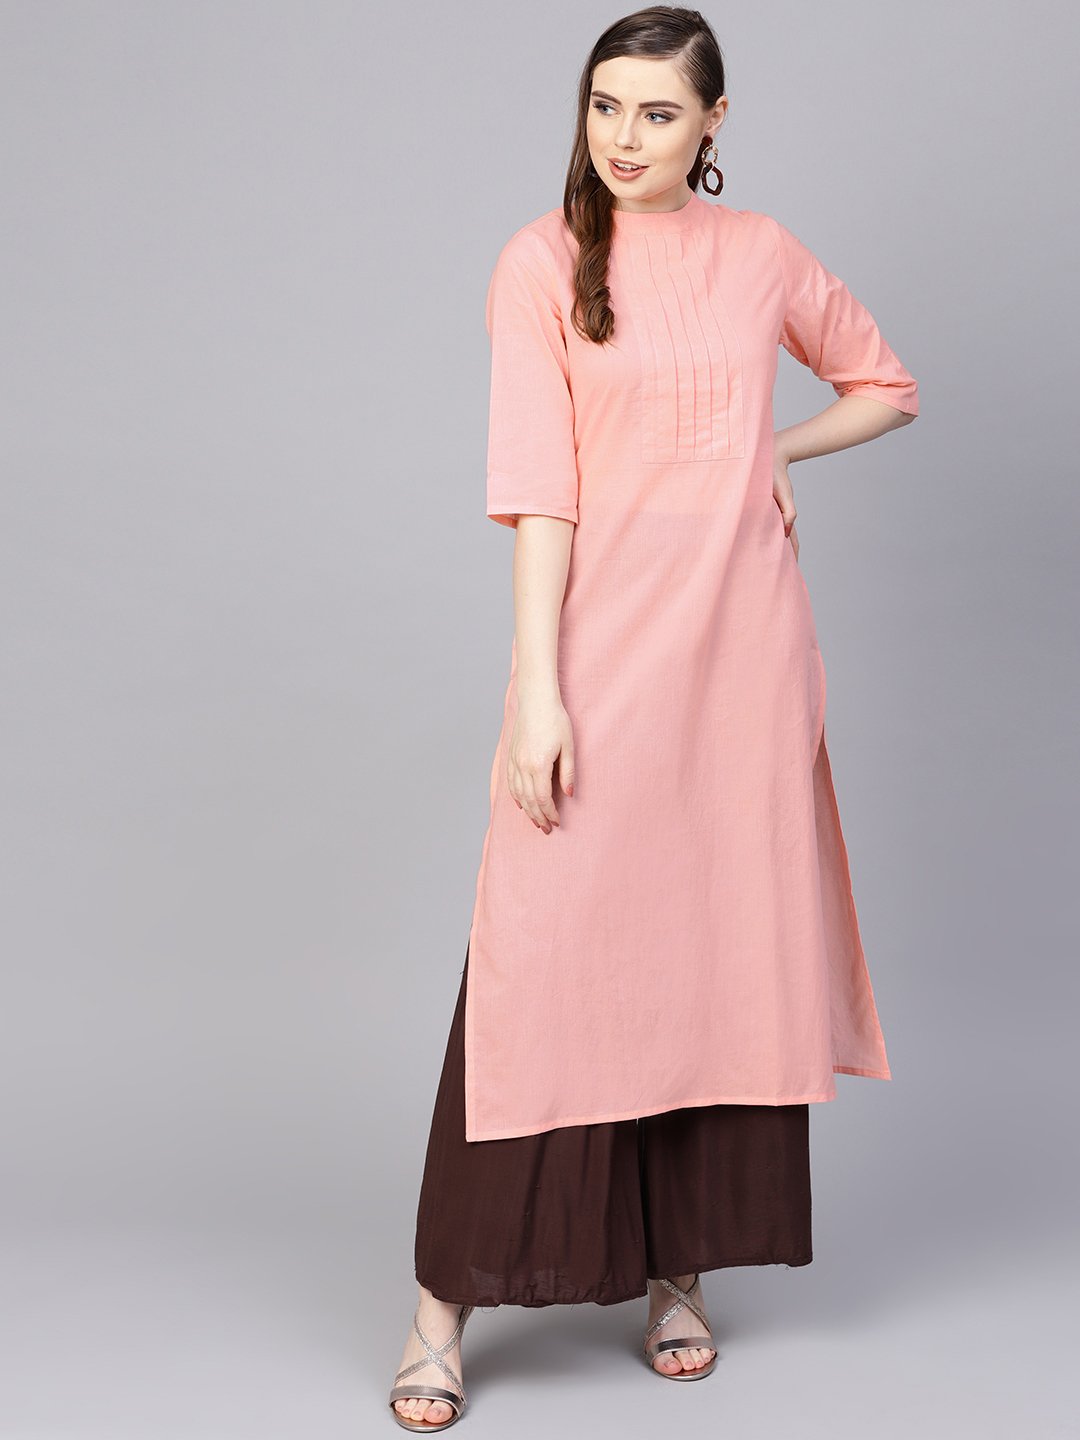 Women's Solid Peach Kurta With Closed Collar And Pleats In Yoke - Nayo Clothing